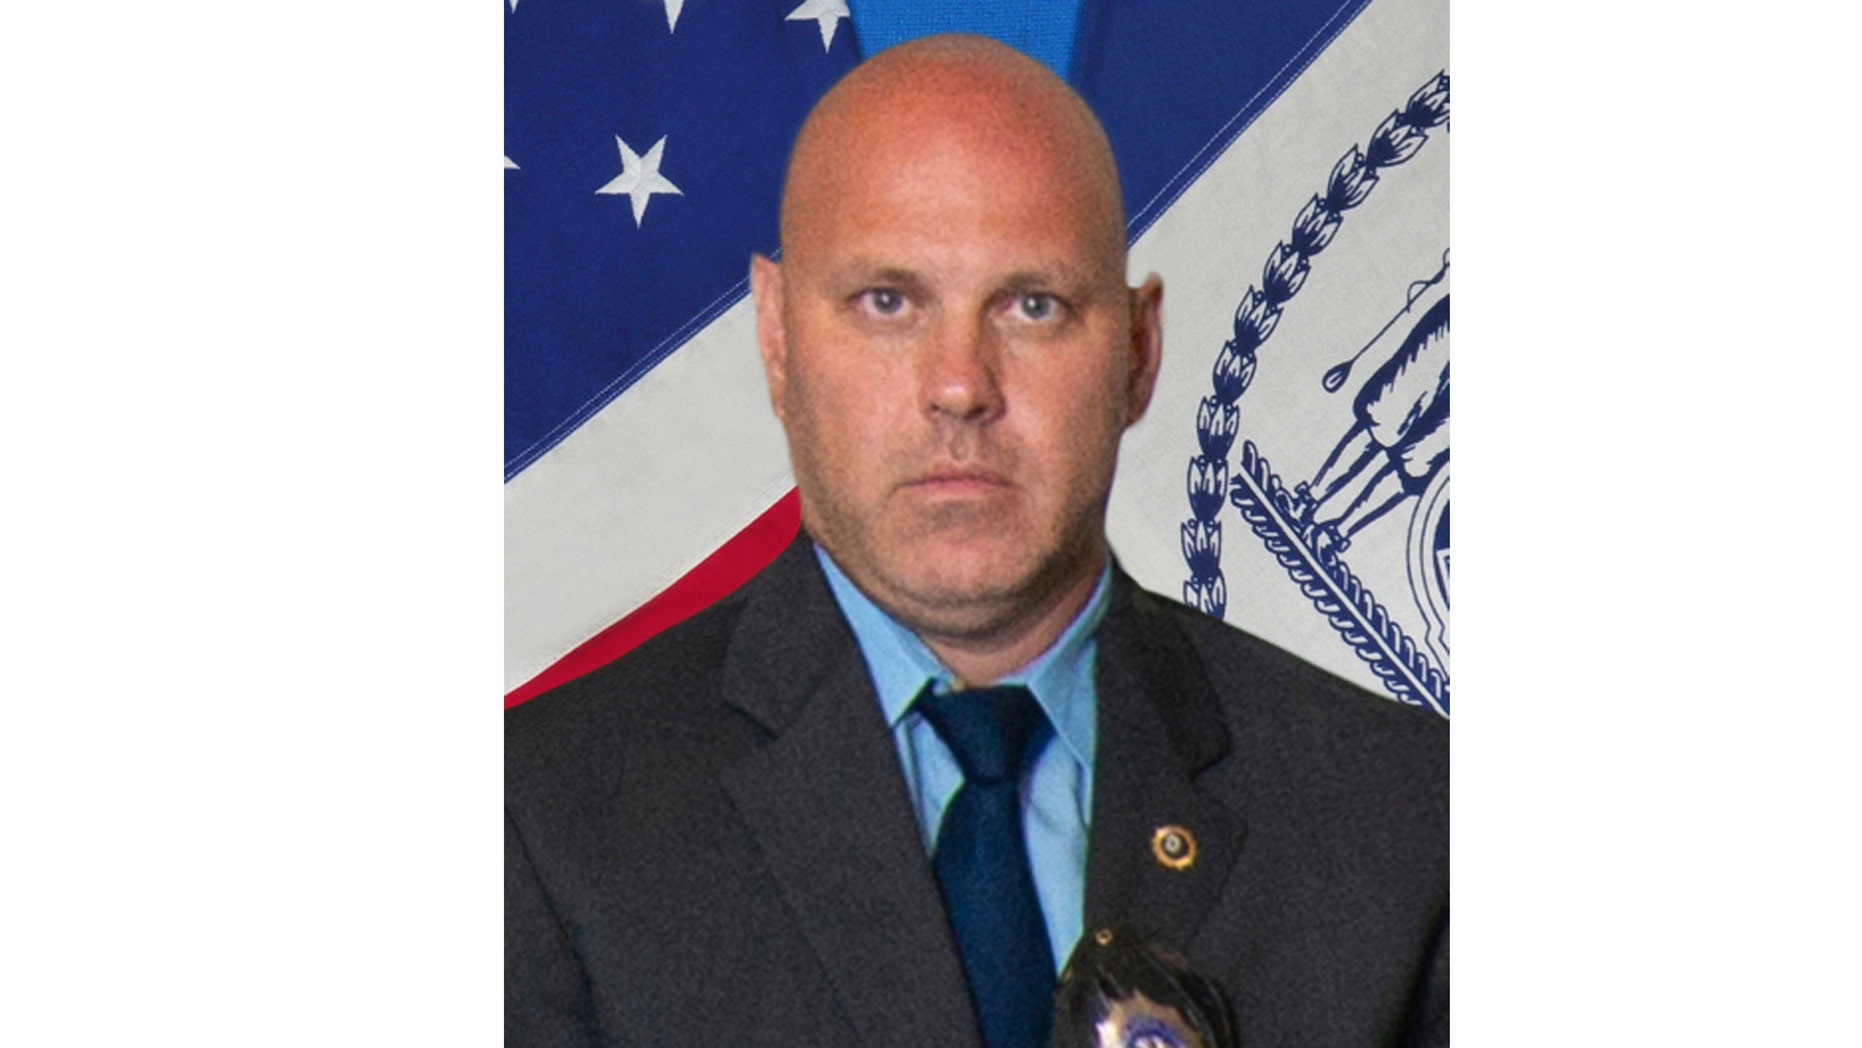 In this undated photo provided by the New York City Police Department, Det. Brian Simonsen is shown. New York Police Commissioner James O'Neill told the media at a news conference that Simonsen was shot dead by a friendly fire on Tuesday night, February 12, 2019, while he was responding to a robbery report at a T-Mobile store in the Richmond Hill section of Queens. (New York City Police Department via AP)